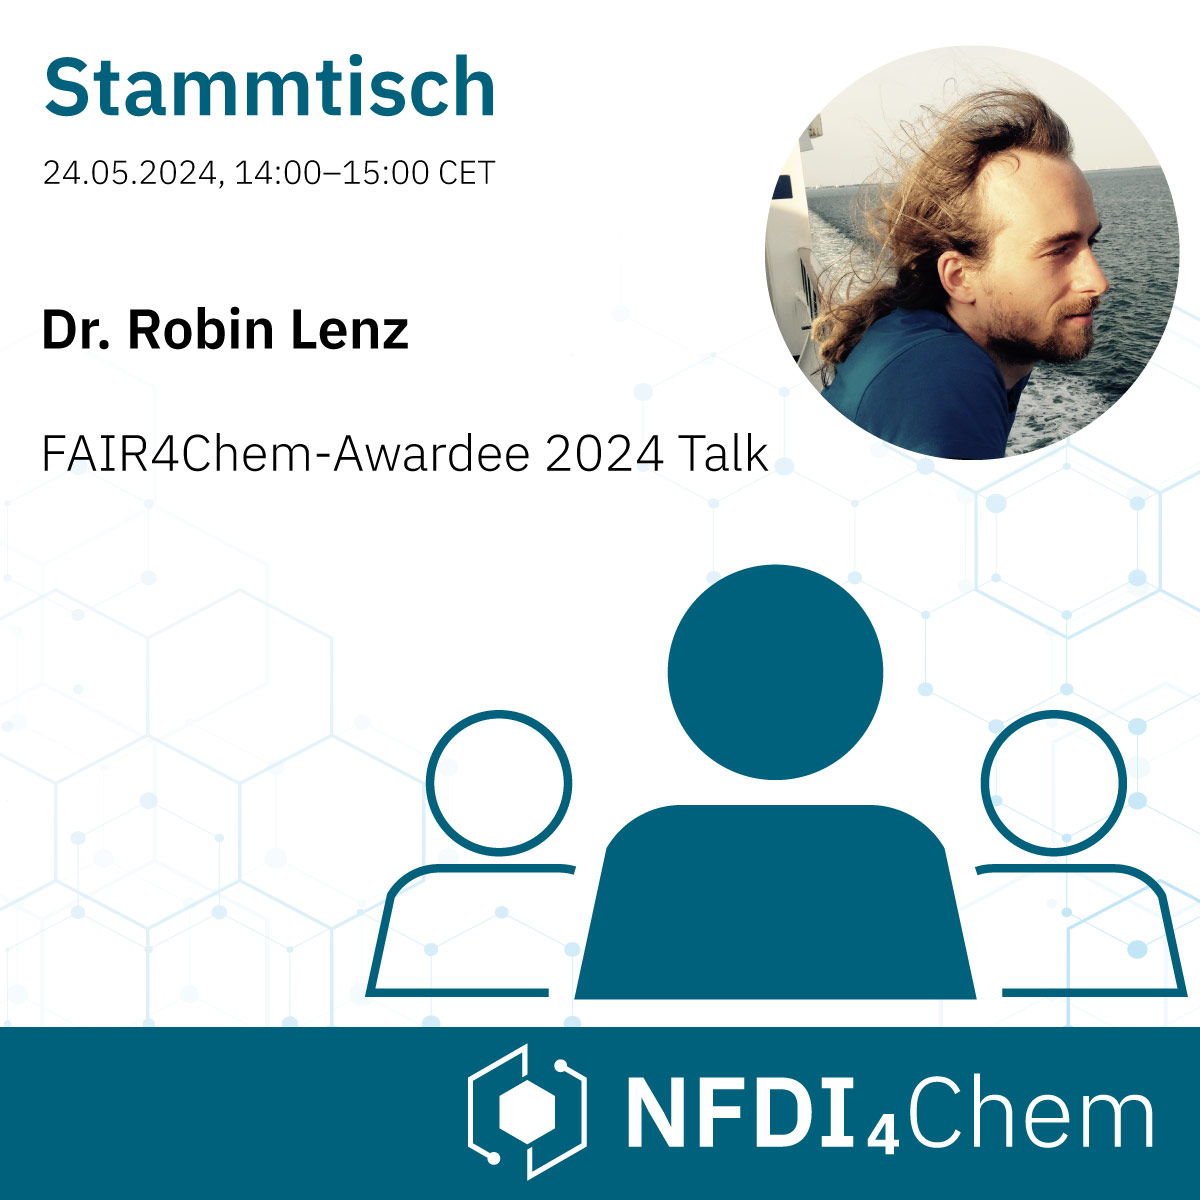 The next Stammtisch is just around the corner. On May 24, Dr. Lenz will talk about his research that led to him winning the FAIR4Chem Award 2024. bit.ly/486Rgzt #chemistry #researchdata #chemtwitter